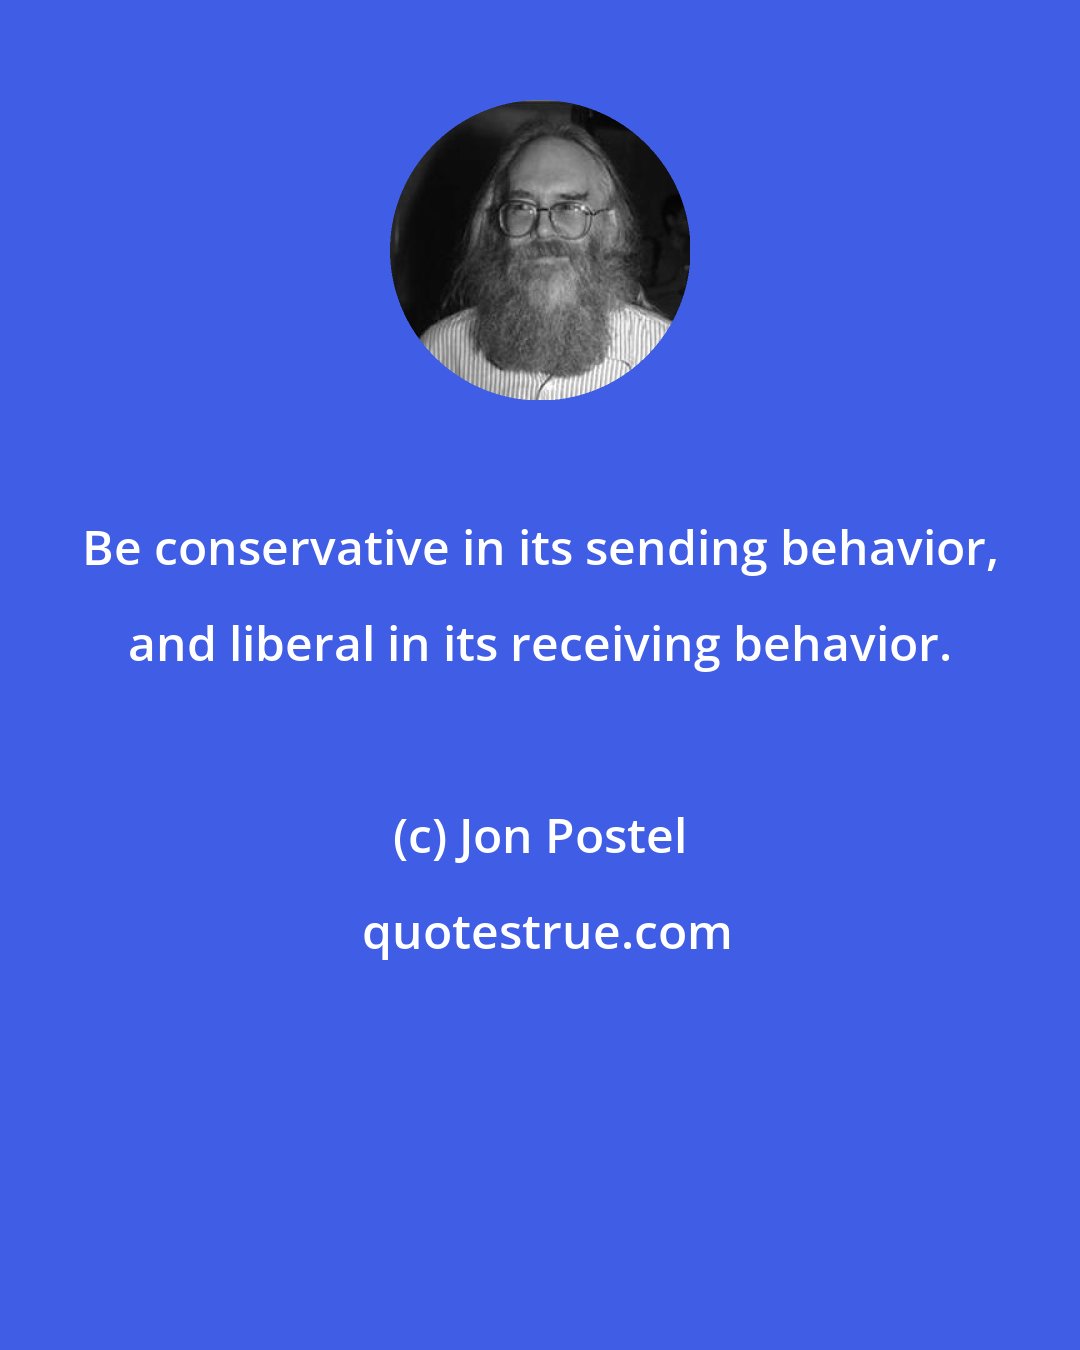 Jon Postel: Be conservative in its sending behavior, and liberal in its receiving behavior.